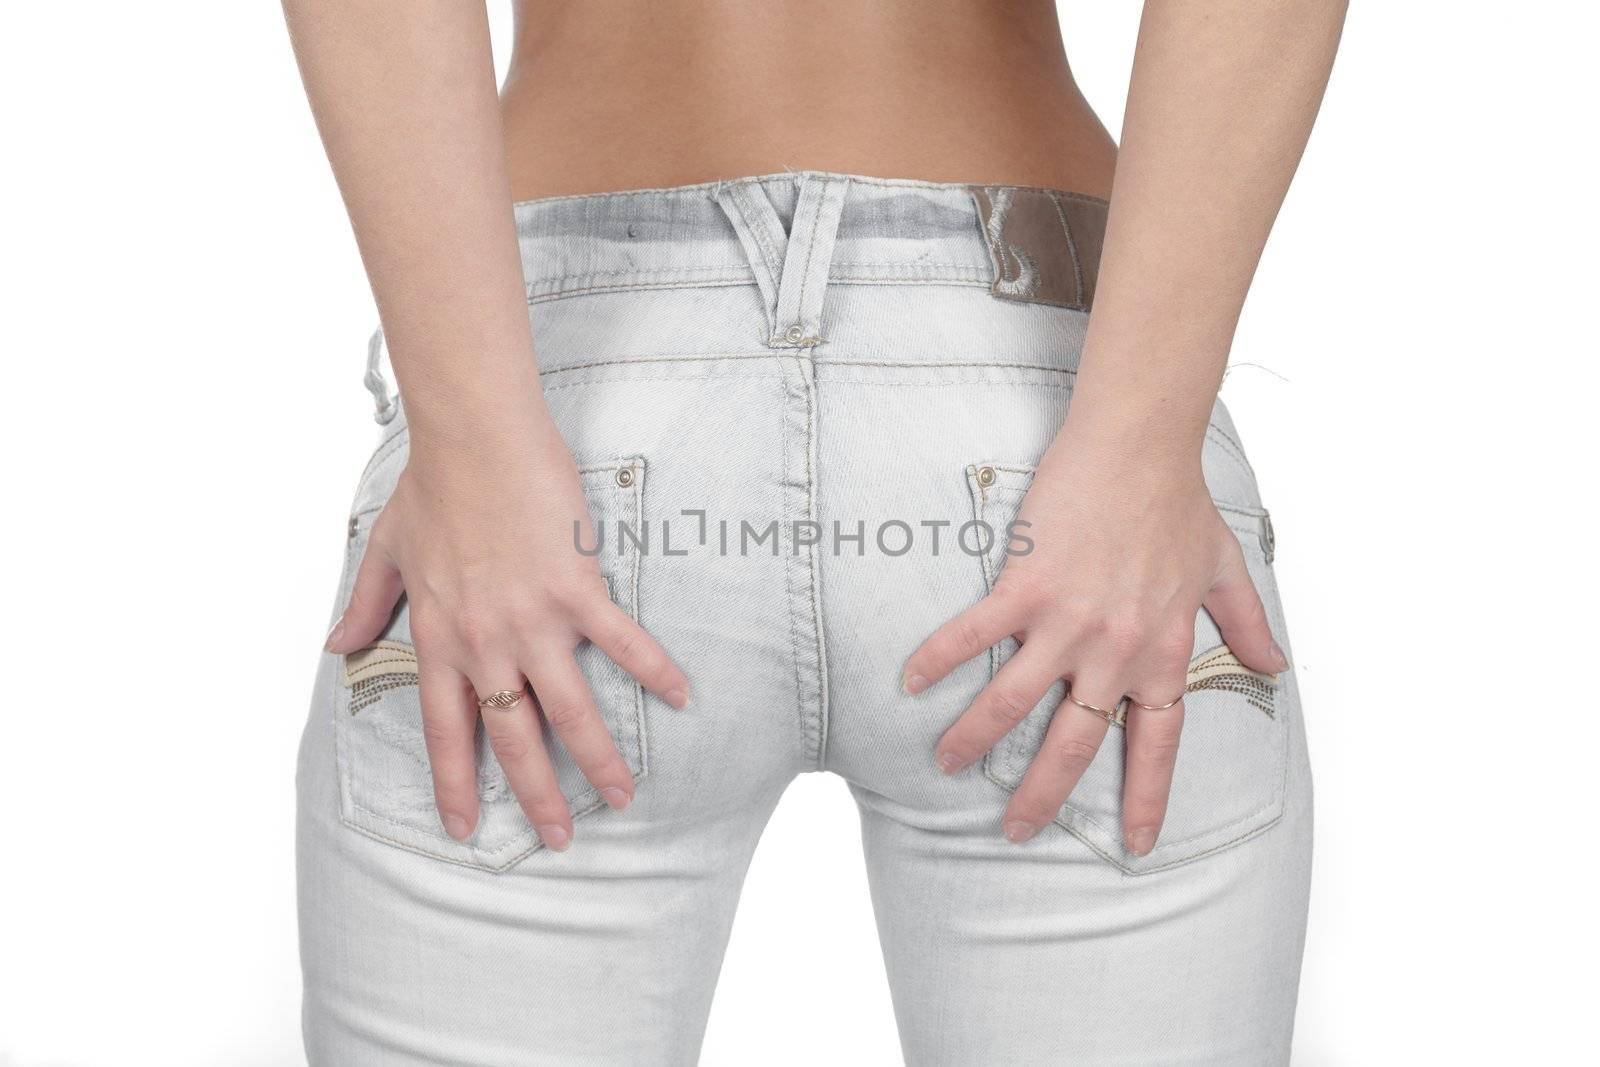 Topless Woman In Jeans. by mettus